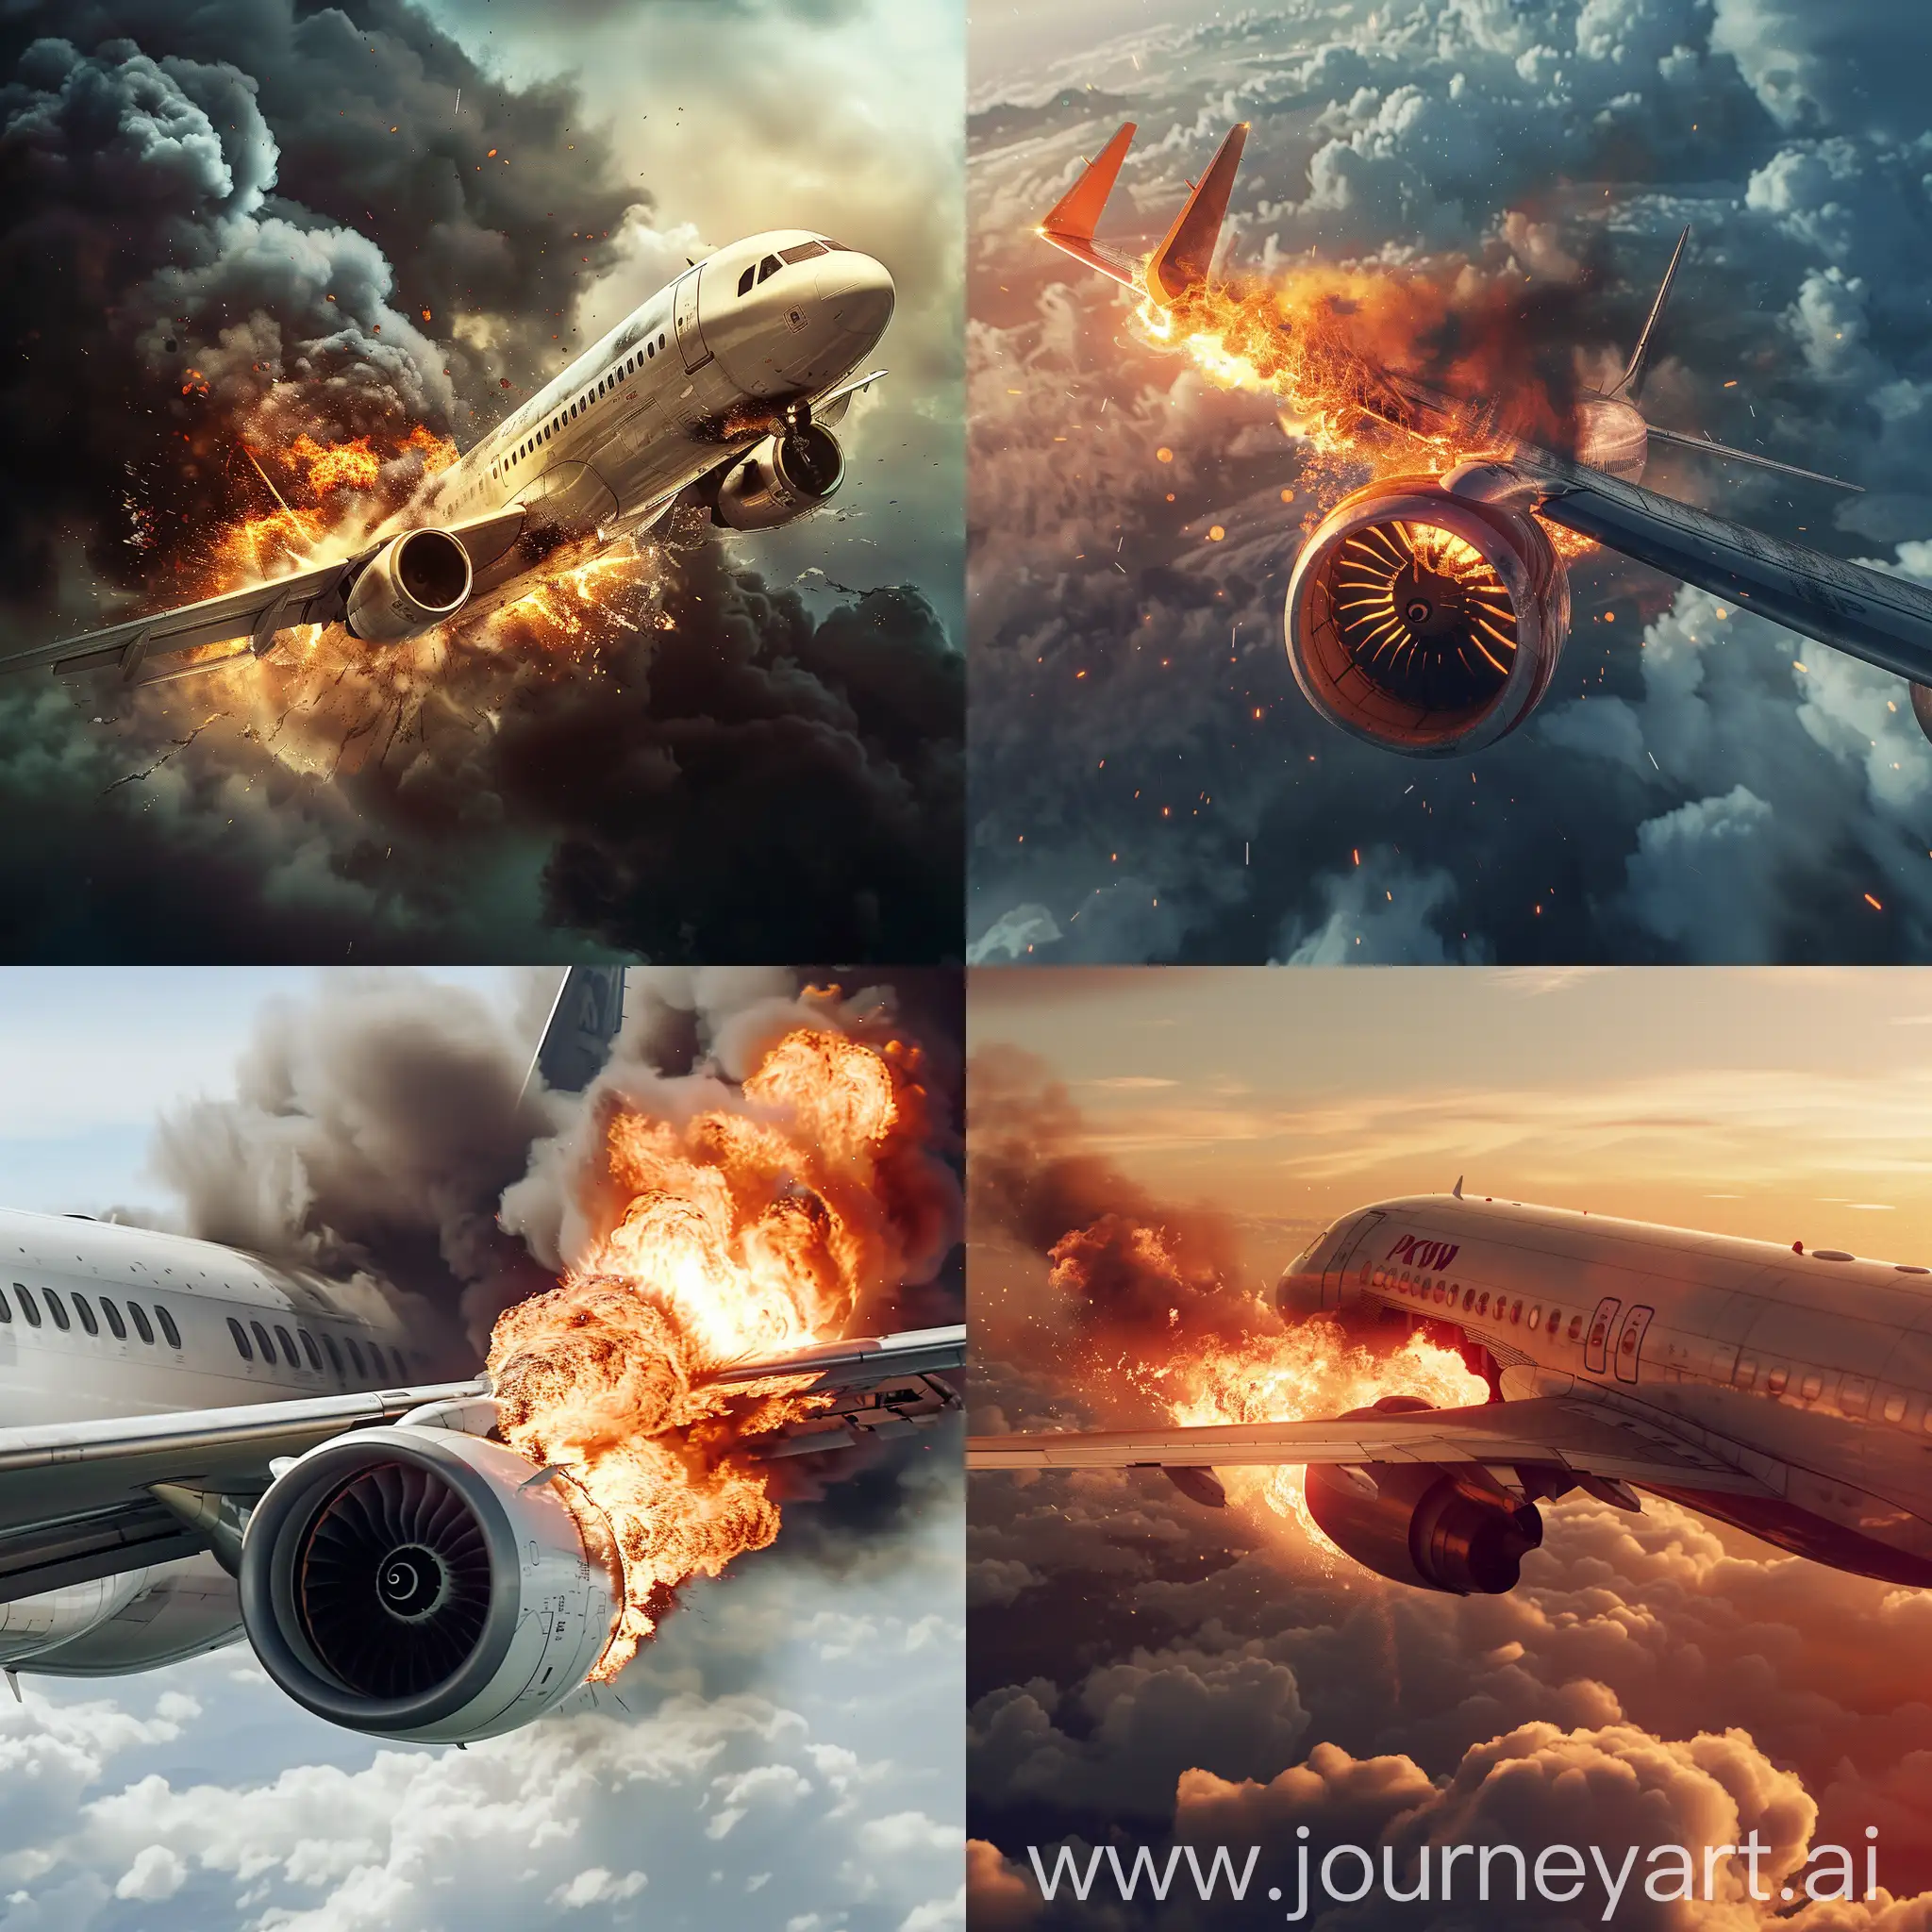 Terrifying-Plane-Crash-with-Fiery-Engine-PNG-Image